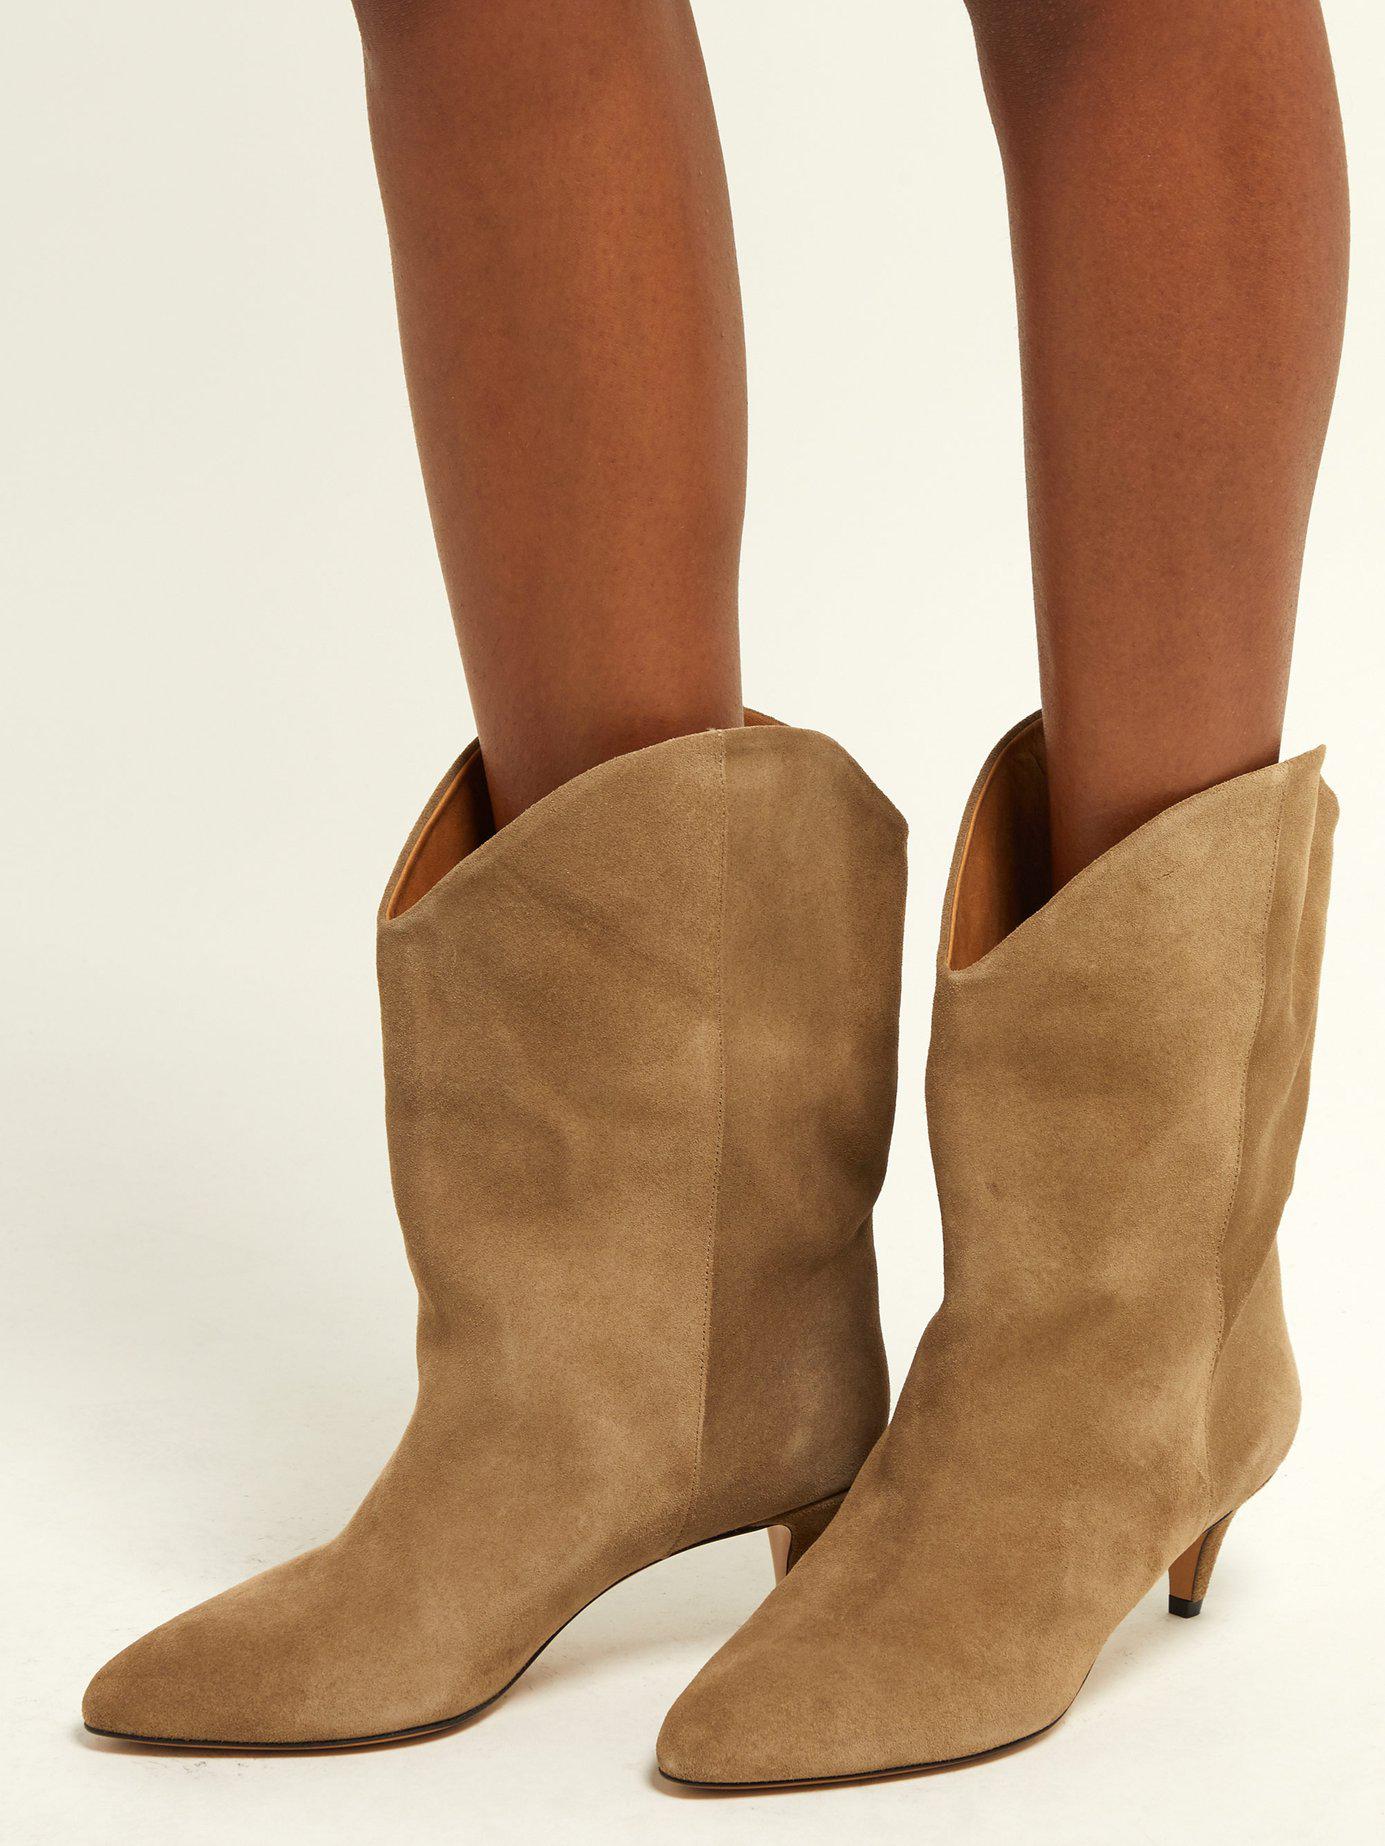 Isabel Marant Dernee Suede Ankle Boots in Natural | Lyst